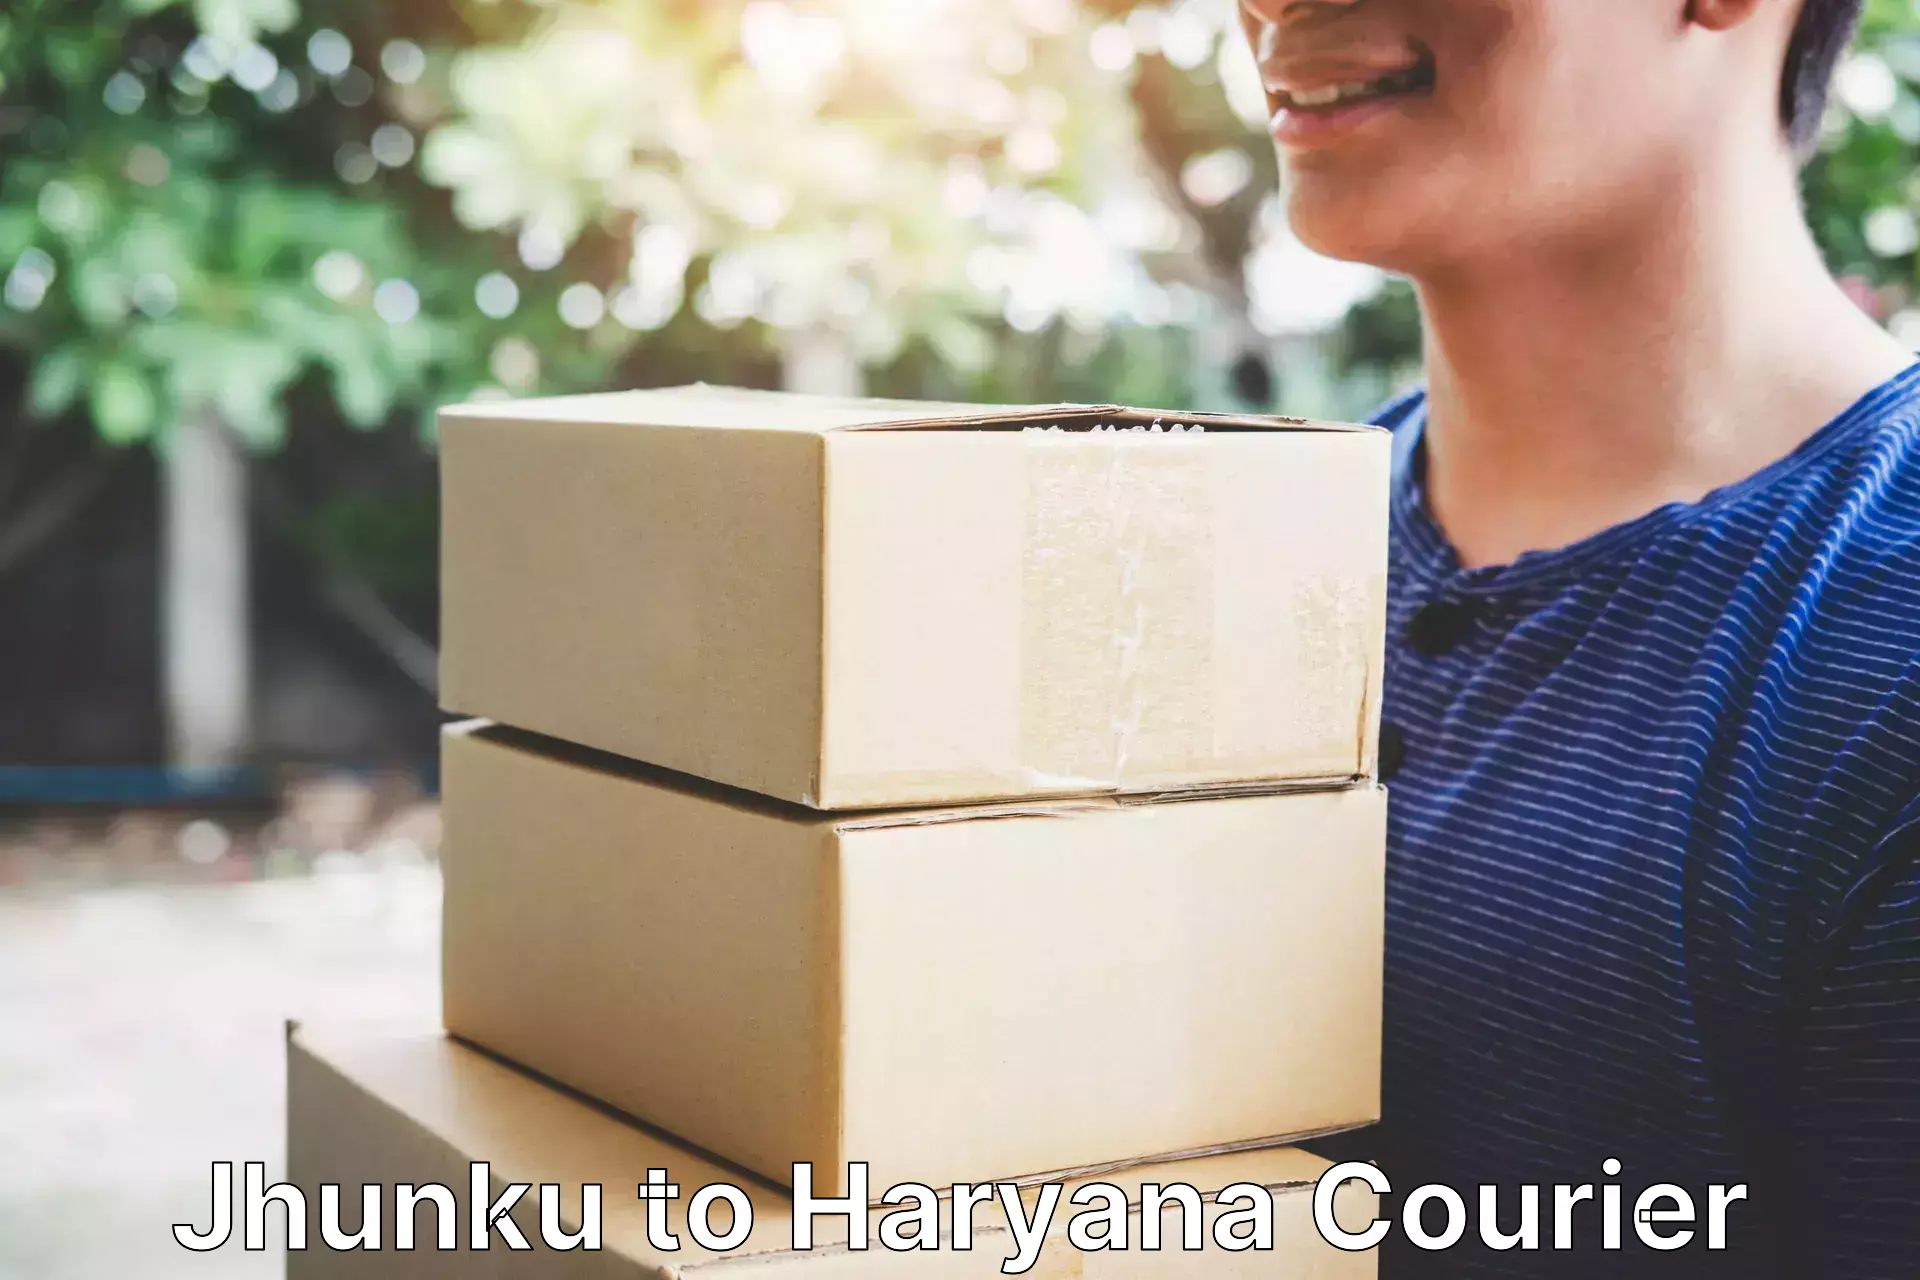 Premium delivery services Jhunku to Haryana